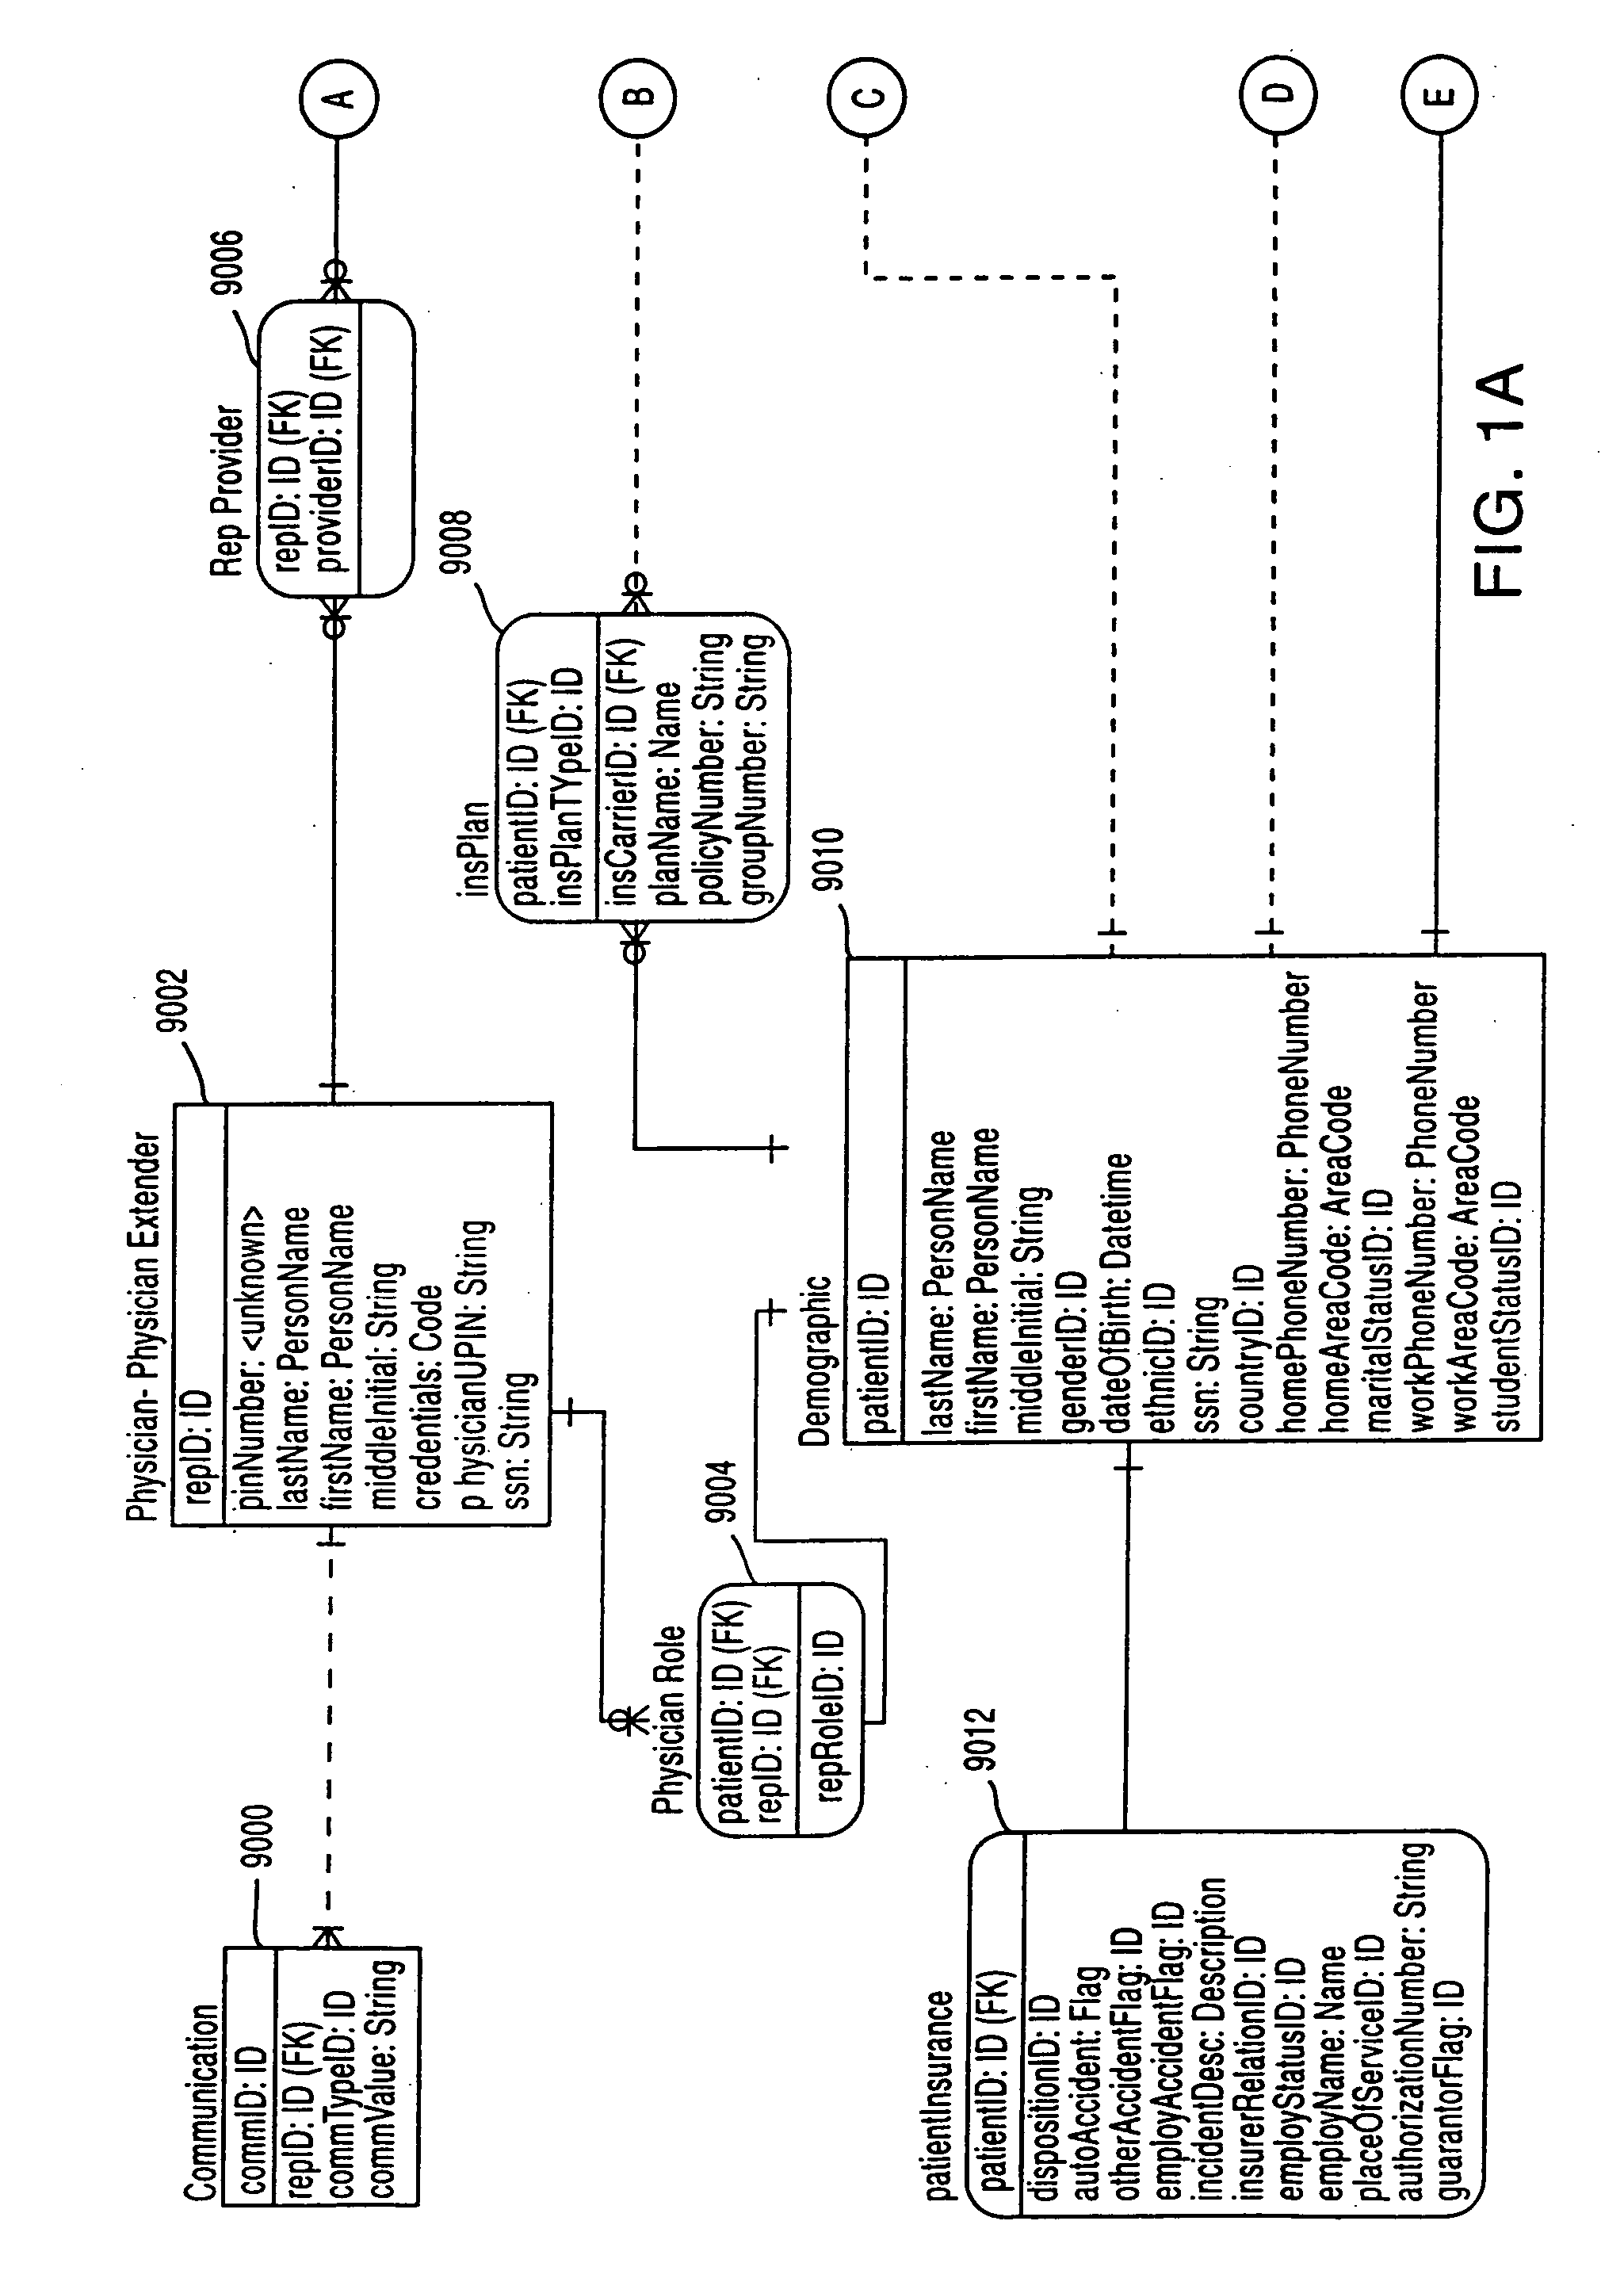 System and method for patient-worn monitoring of patients in geographically dispersed health care locations